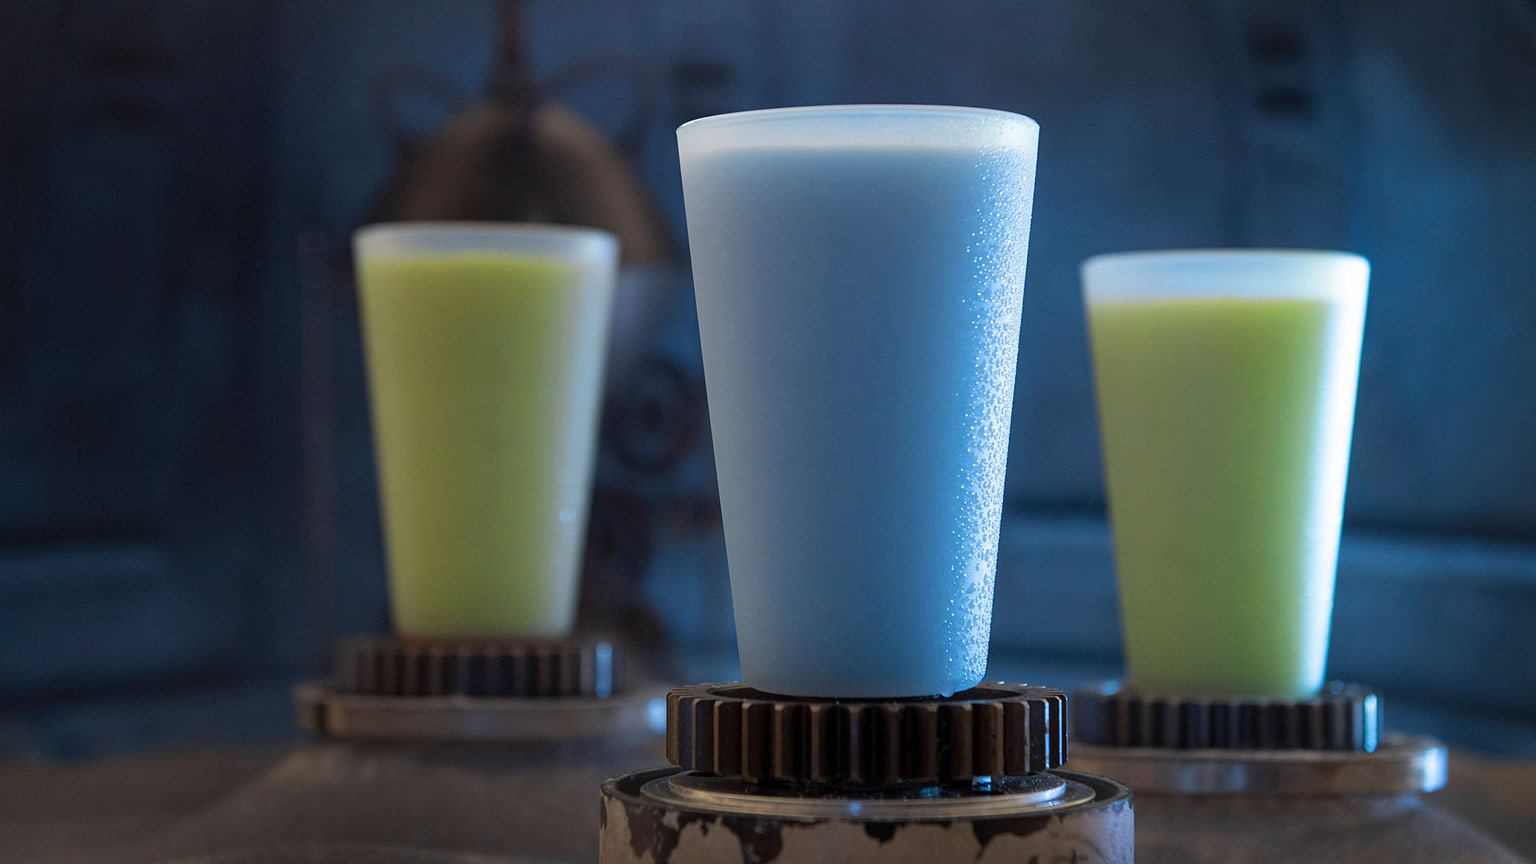 Choose between Blue and Green Milk on your next visit to Star Wars: Galaxy's Edge!